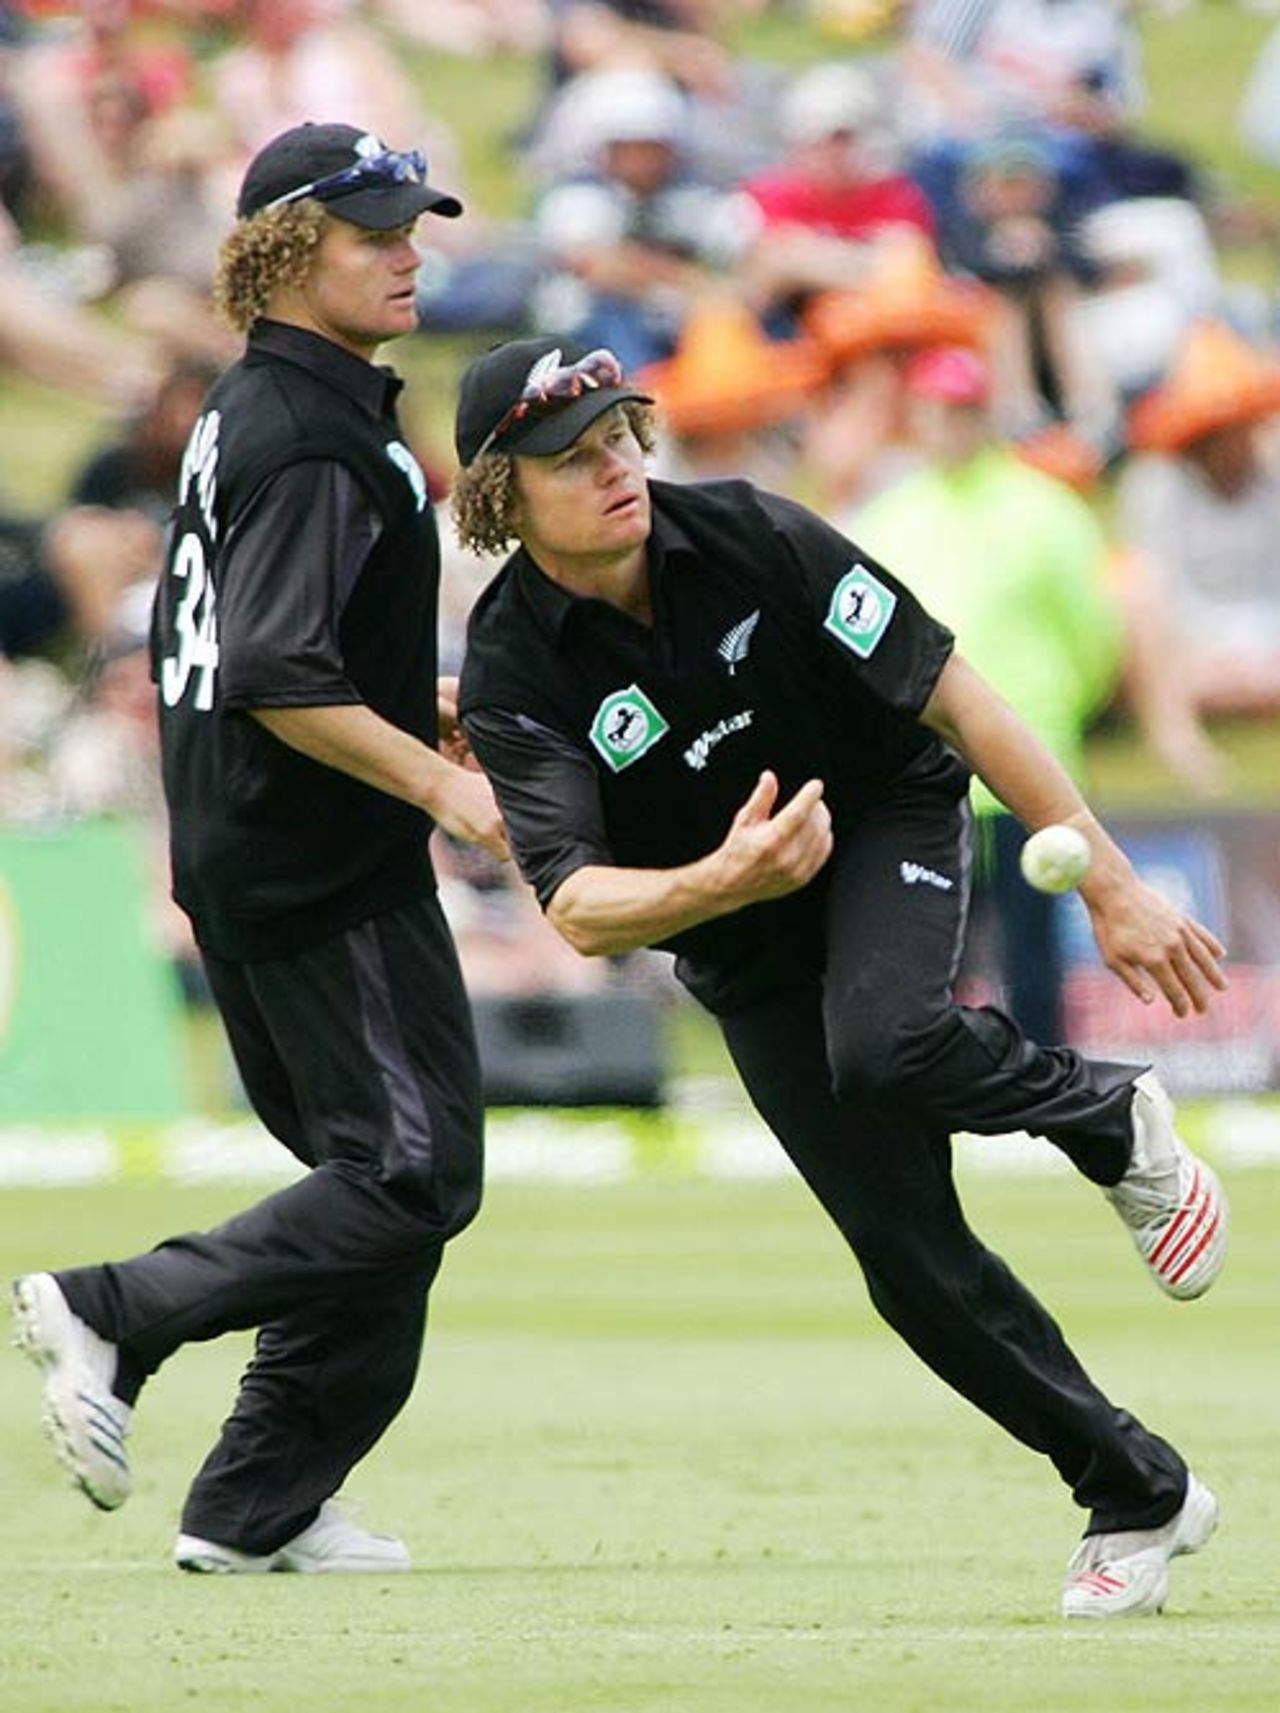 The Marshall twins were outstanding in the field, New Zealand v Sri Lanka, 2nd ODI, Queenstown, December 31, 2006